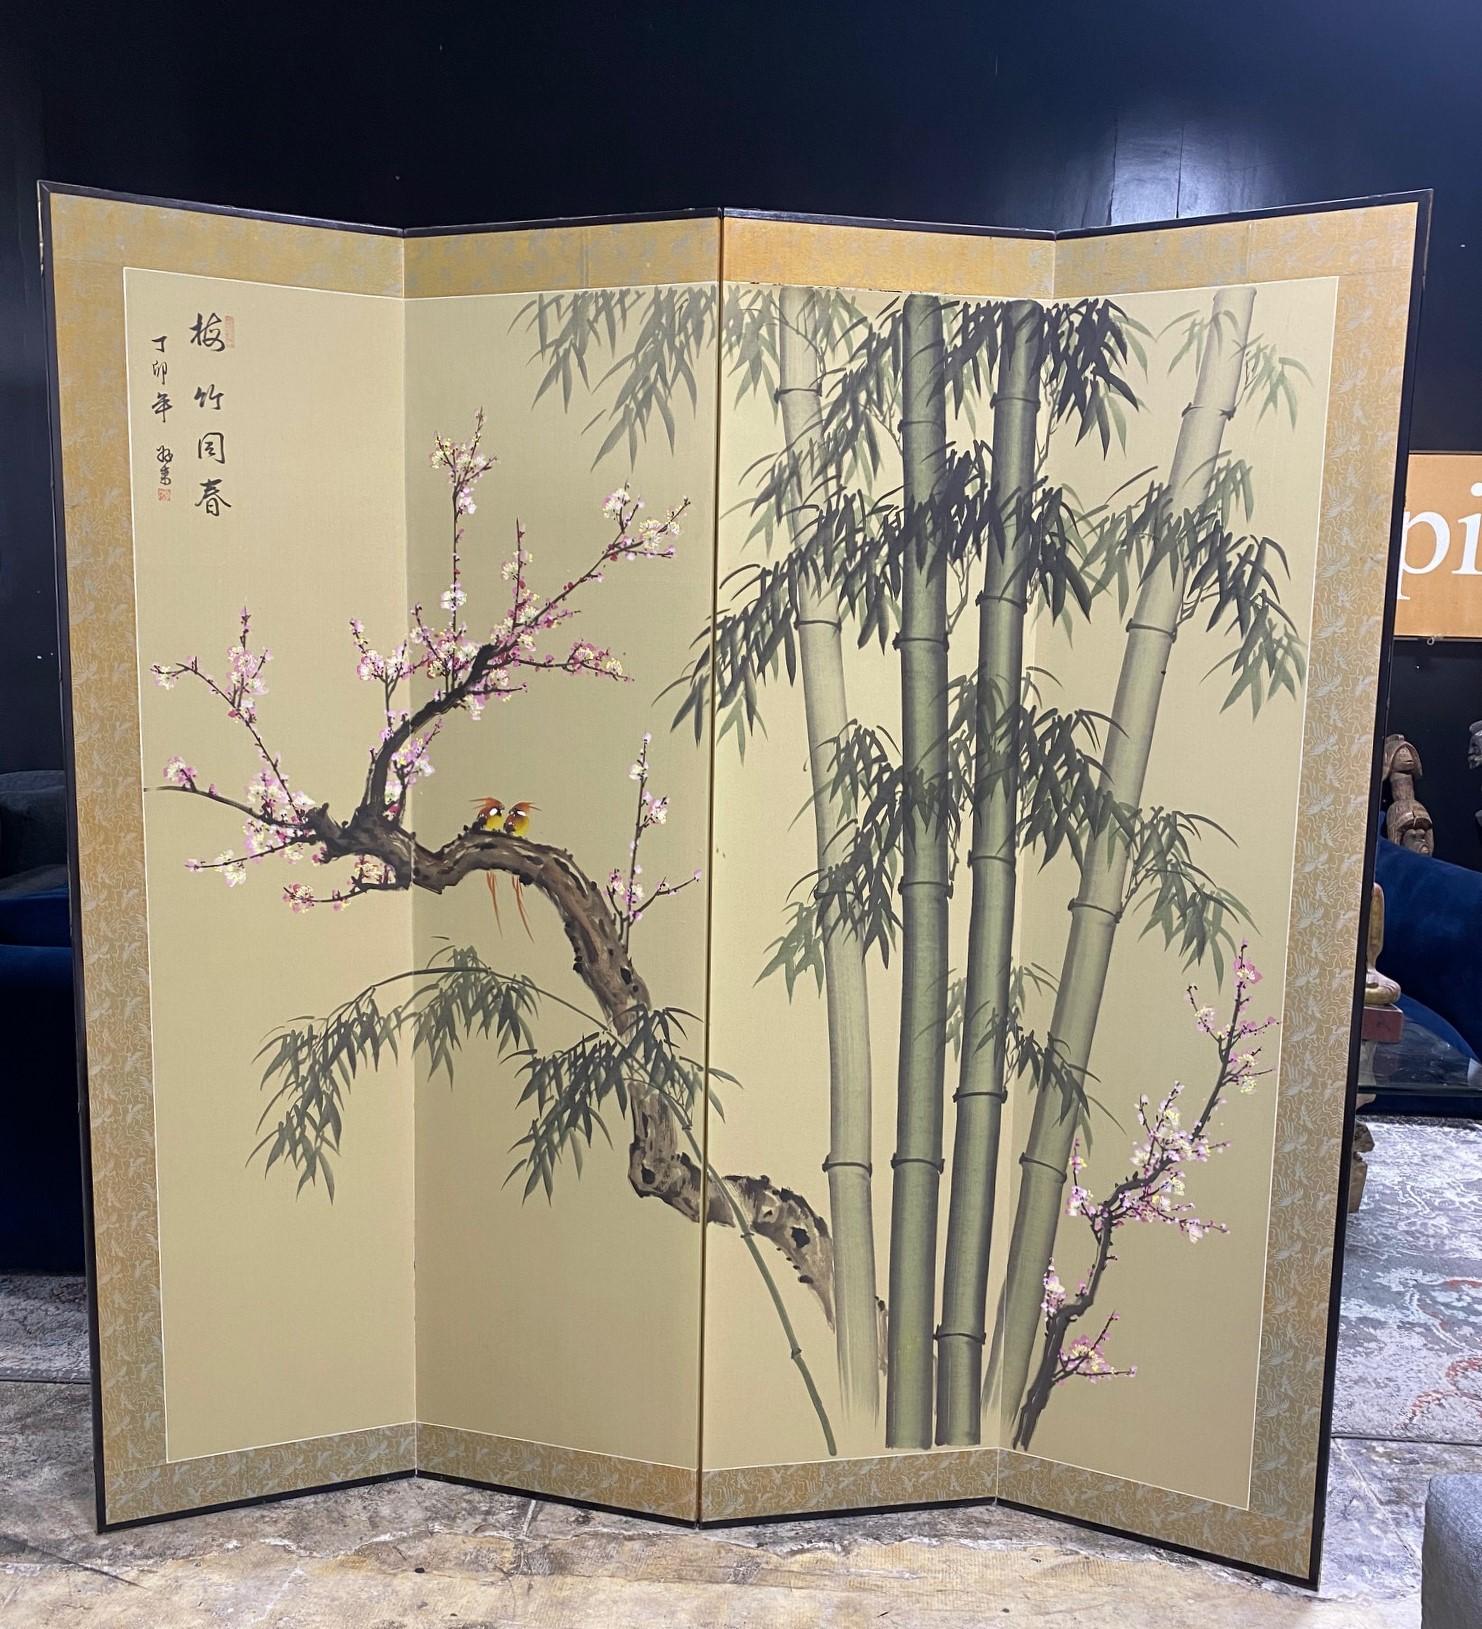 A gorgeous large/tall four-panel Japanese Byobu folding screen depicting a nature scene/landscape with playful yellow and orange birds frolicking in nature among the branches of a blossoming/blooming cherry tree and bamboo forest. The work is